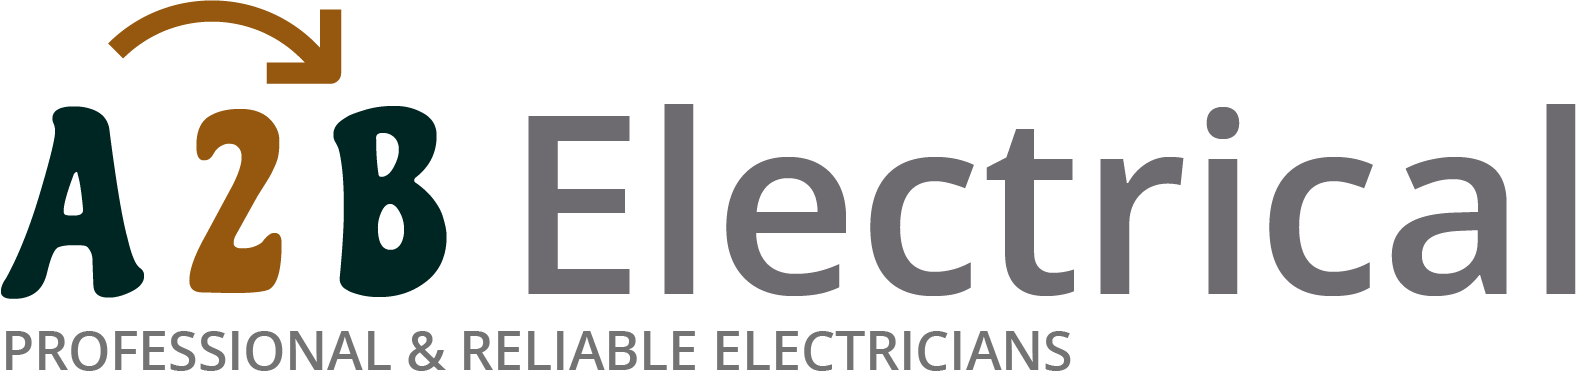 If you have electrical wiring problems in Sandy, we can provide an electrician to have a look for you. 